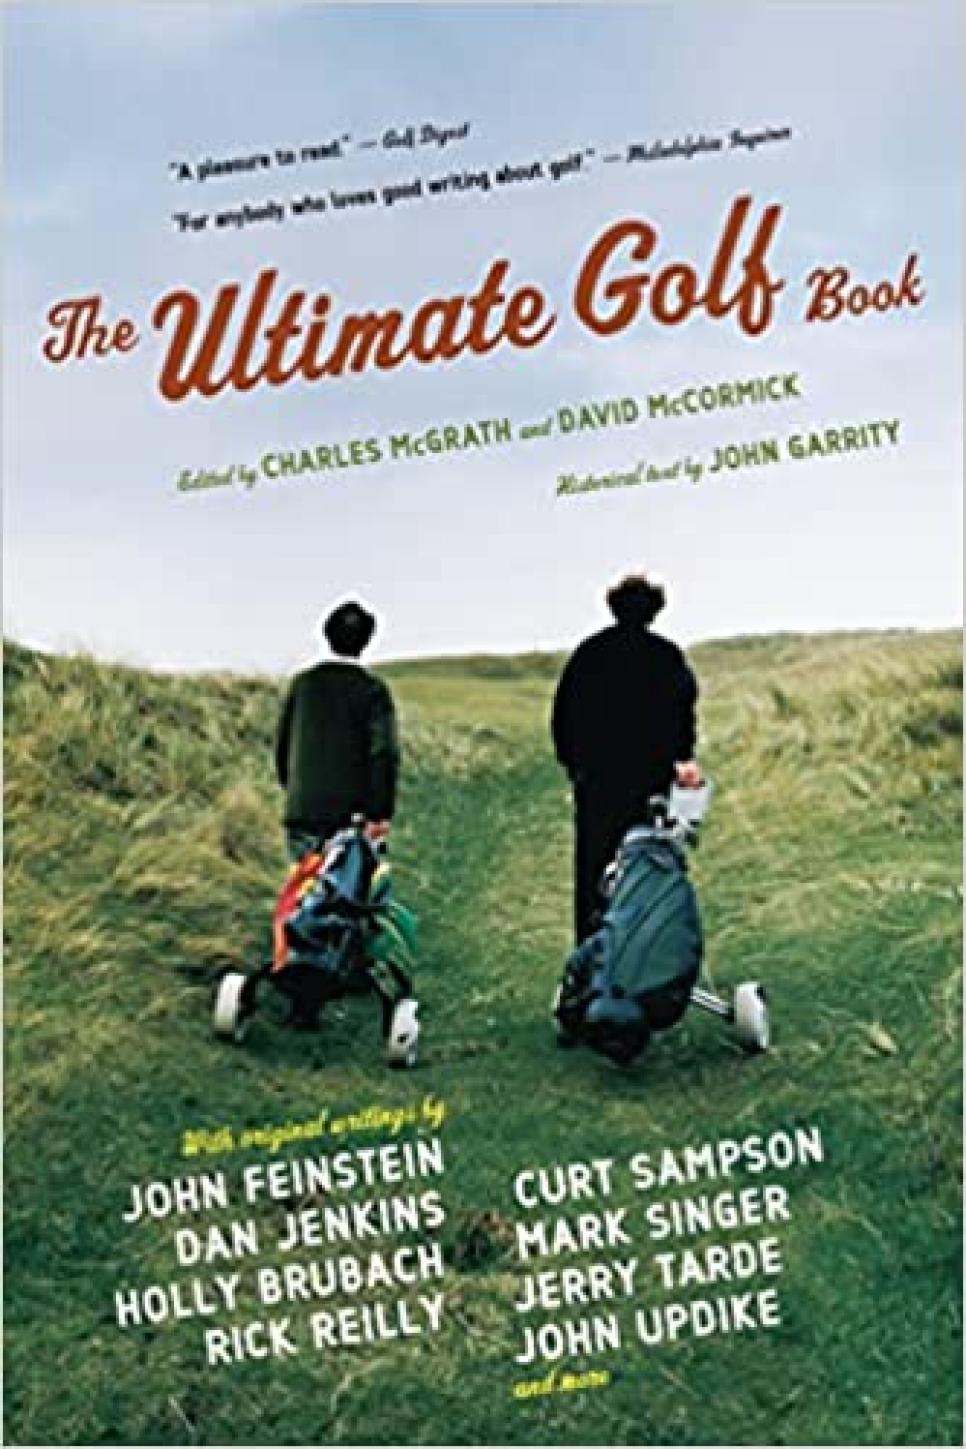 rx-amazonthe-ultimate-golf-book-by-charles-mcgrath-and-david-mccormick-2002.jpeg